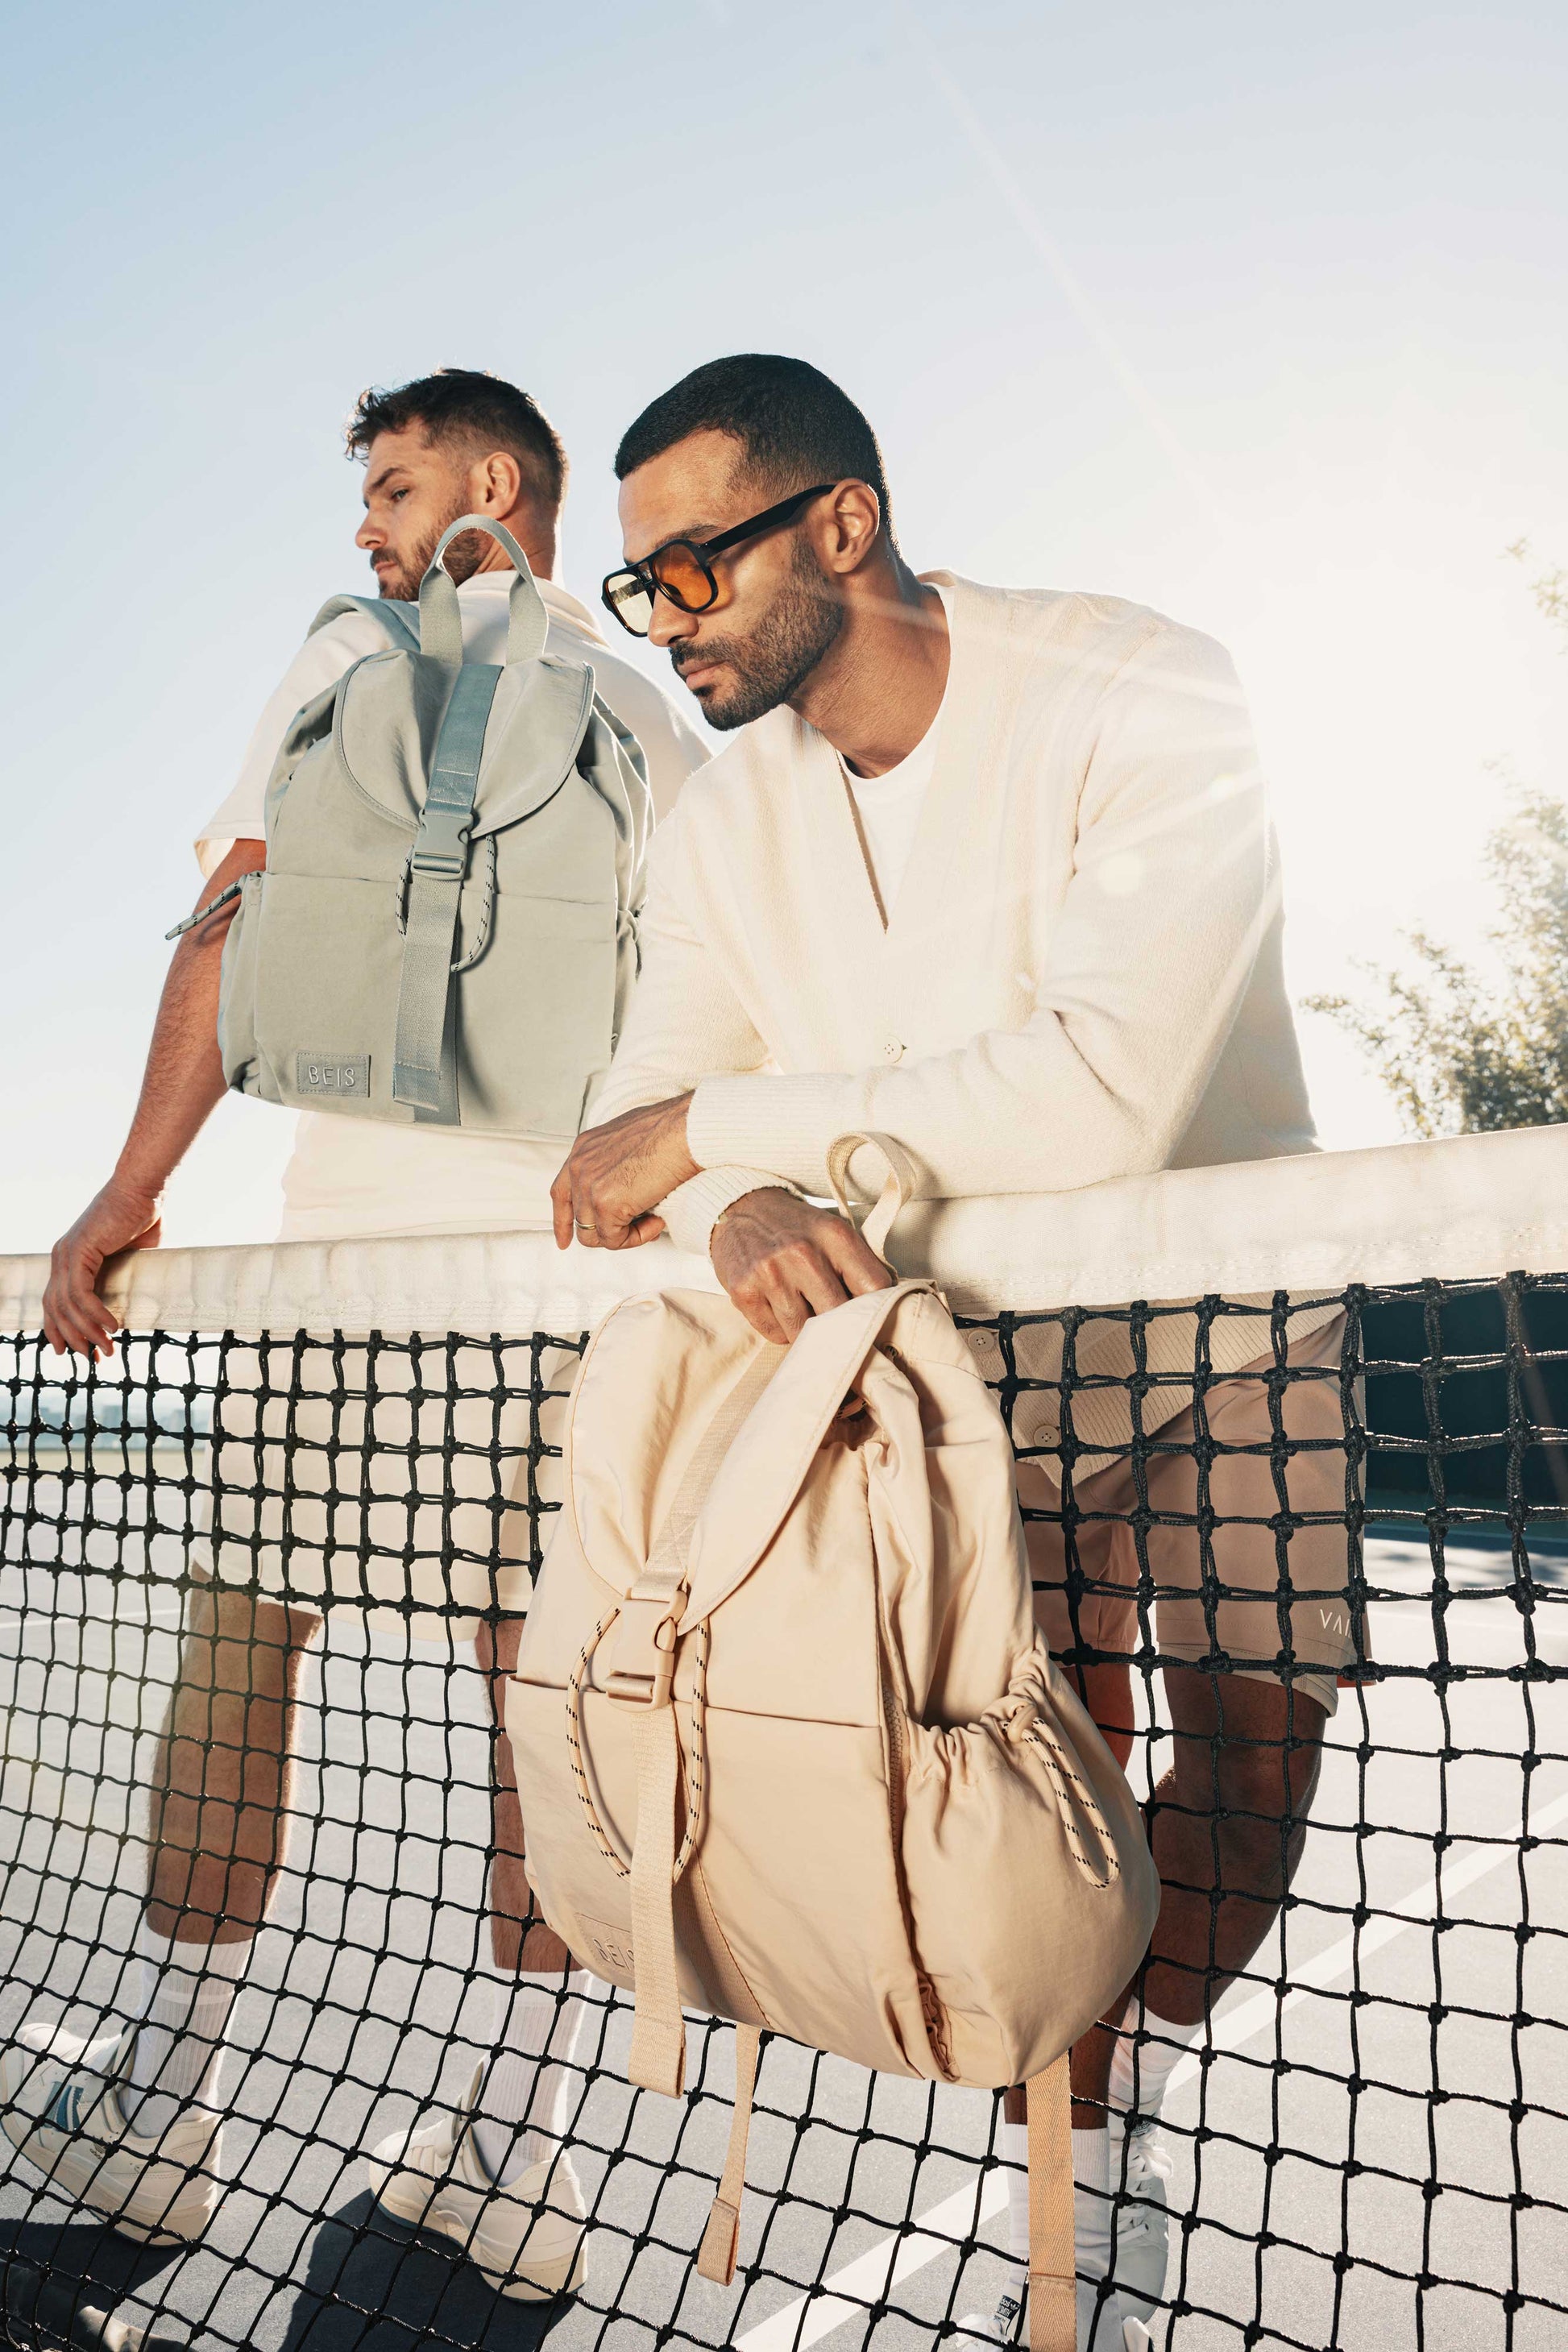 The Sport Backpack Chic - Tennis in Backpack Inspired Beige